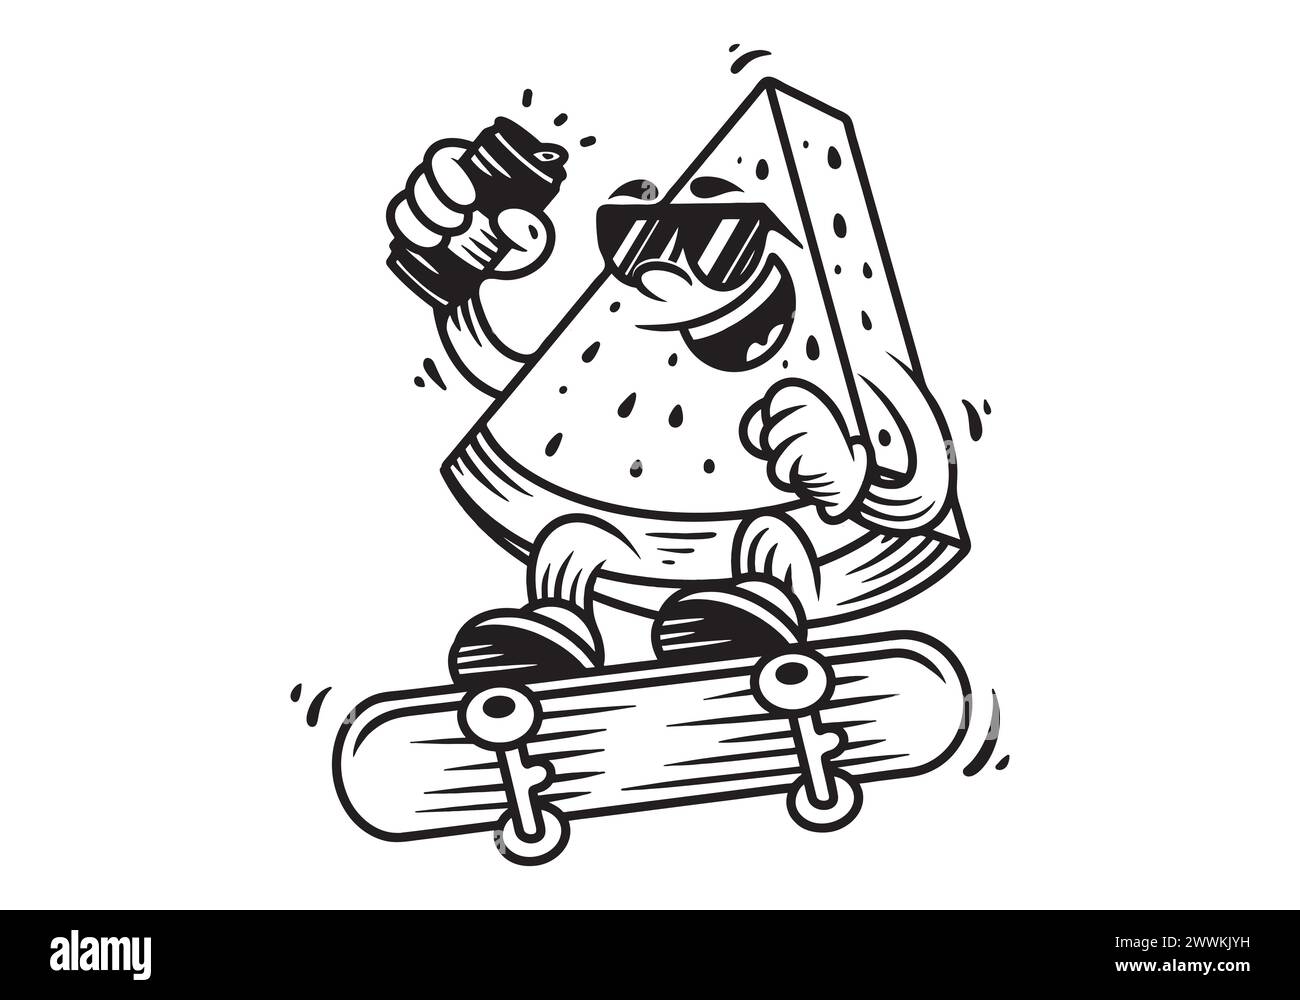 Line art Mascot character of watermelon jumping on the skateboard. Holding a beer can Stock Vector